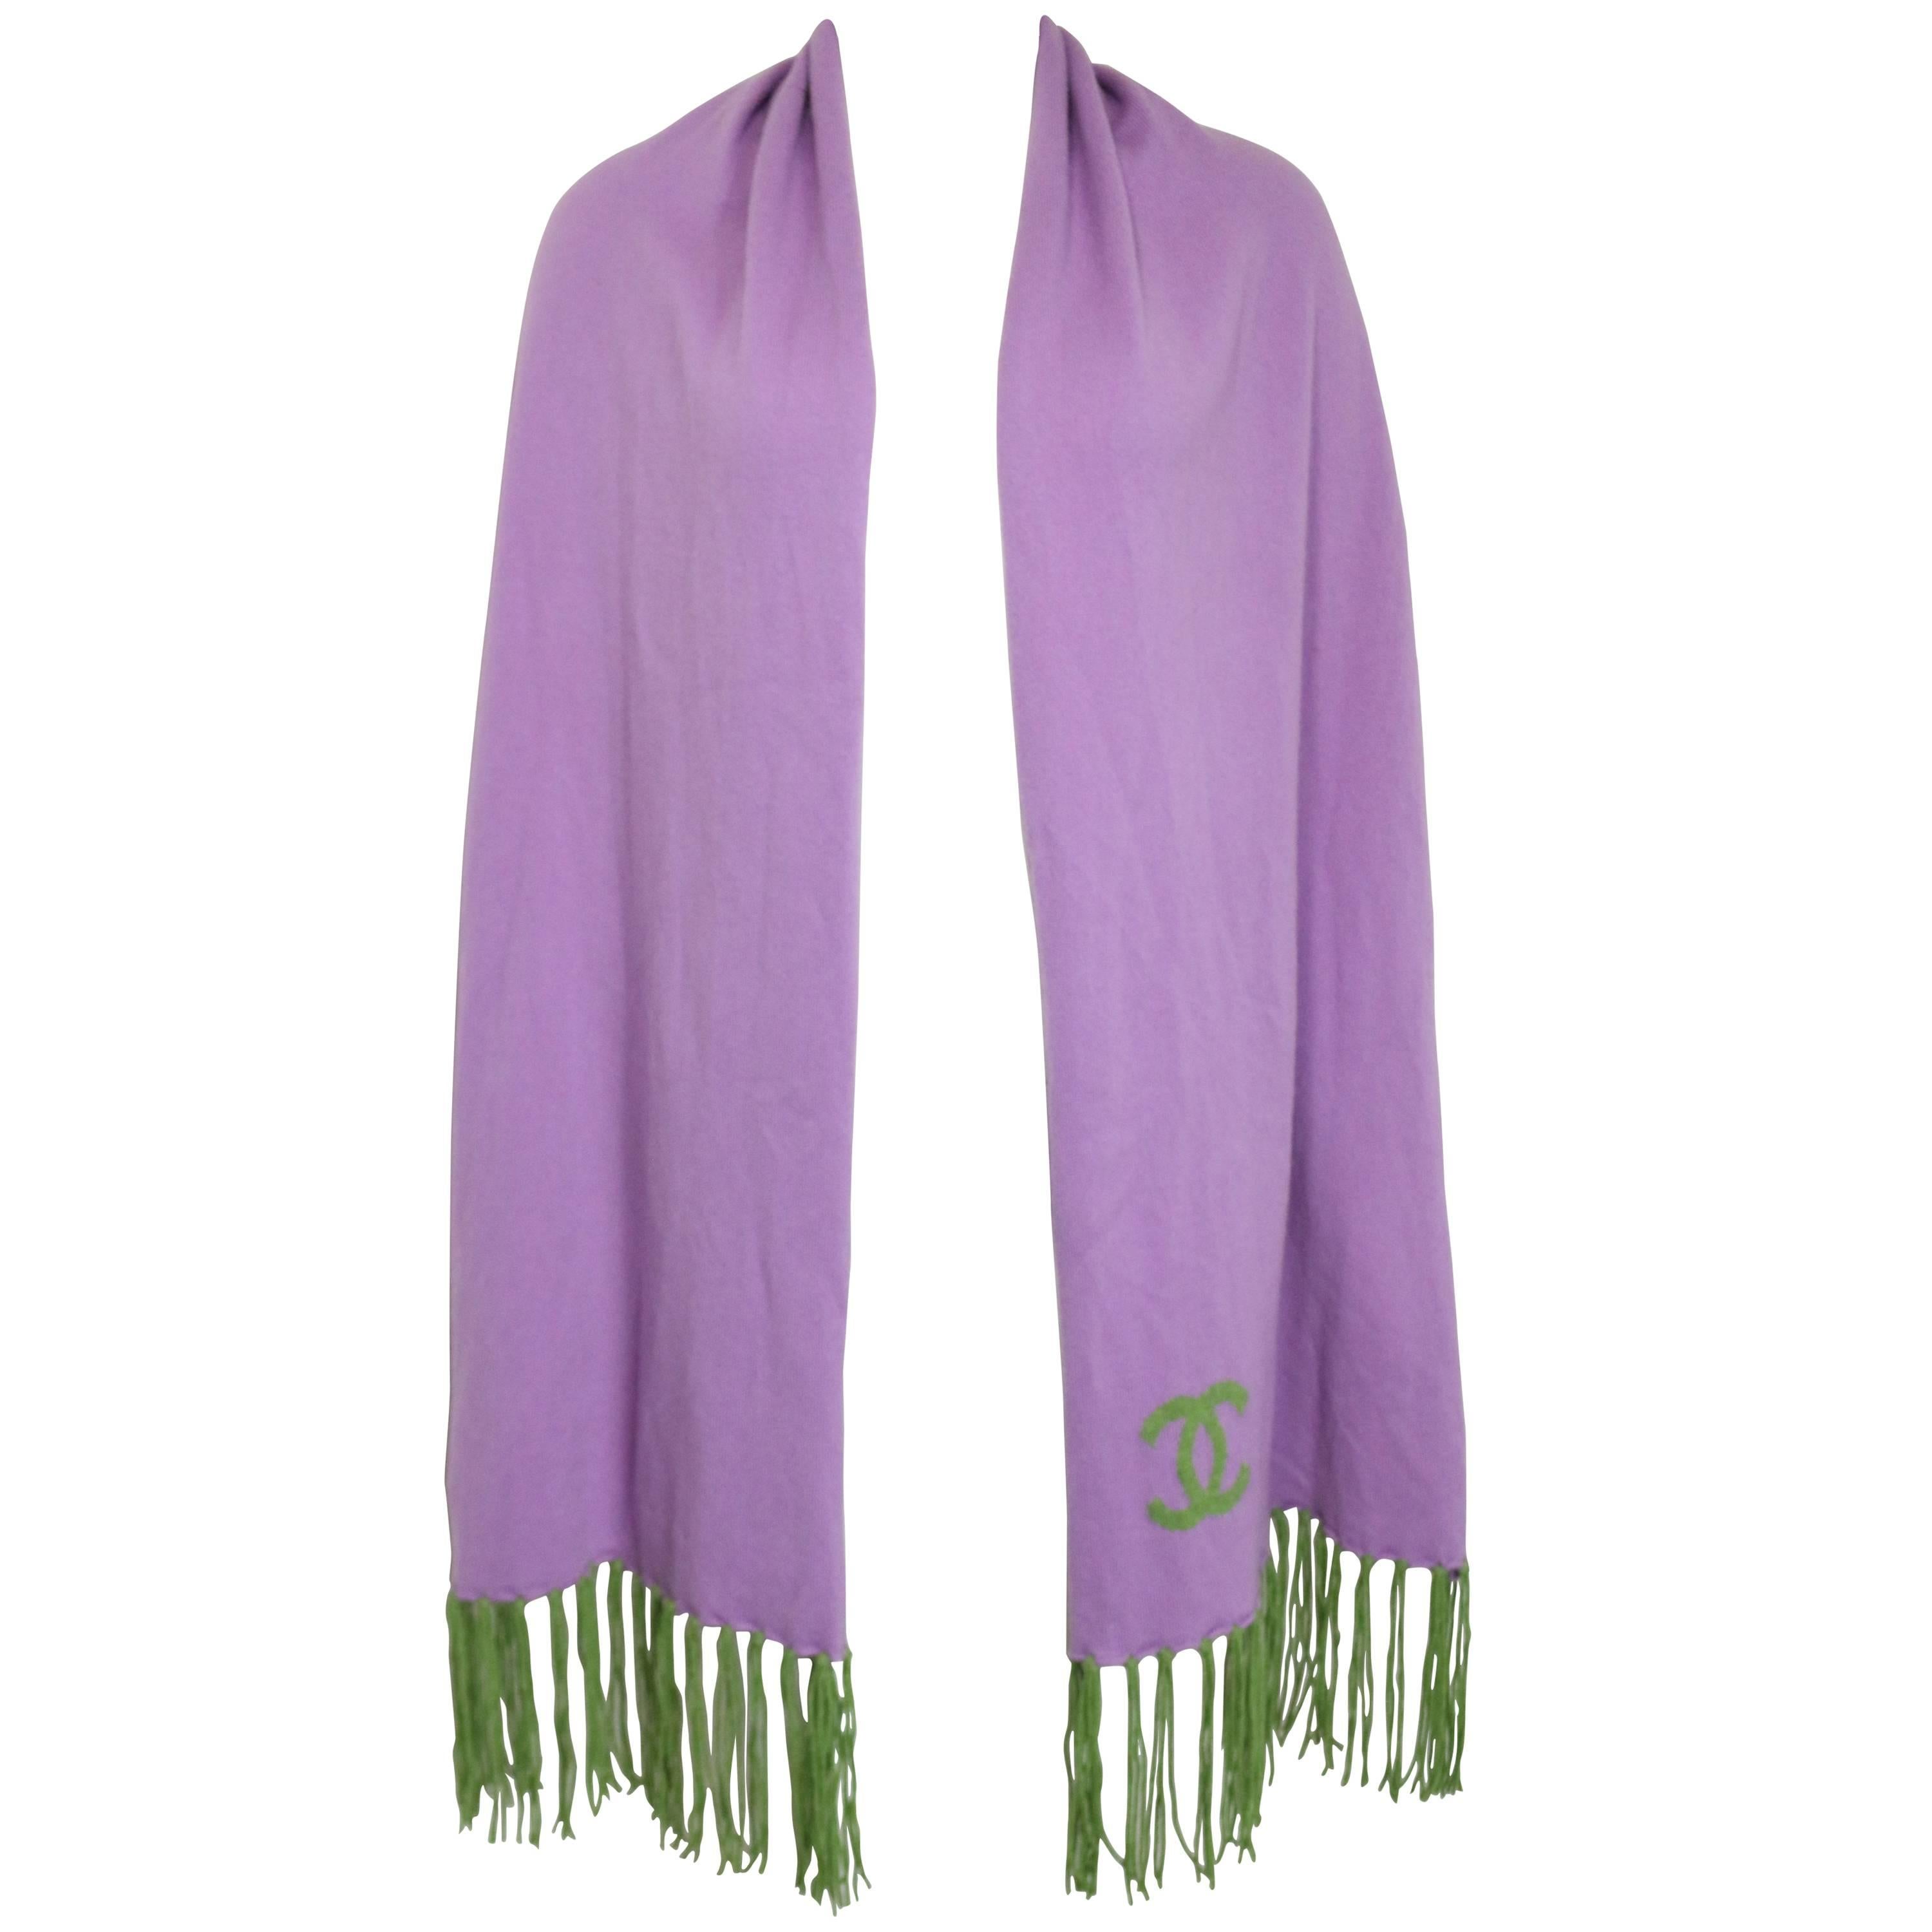 Chanel Purple Cashmere "CC" Scarf with Green Fringe 